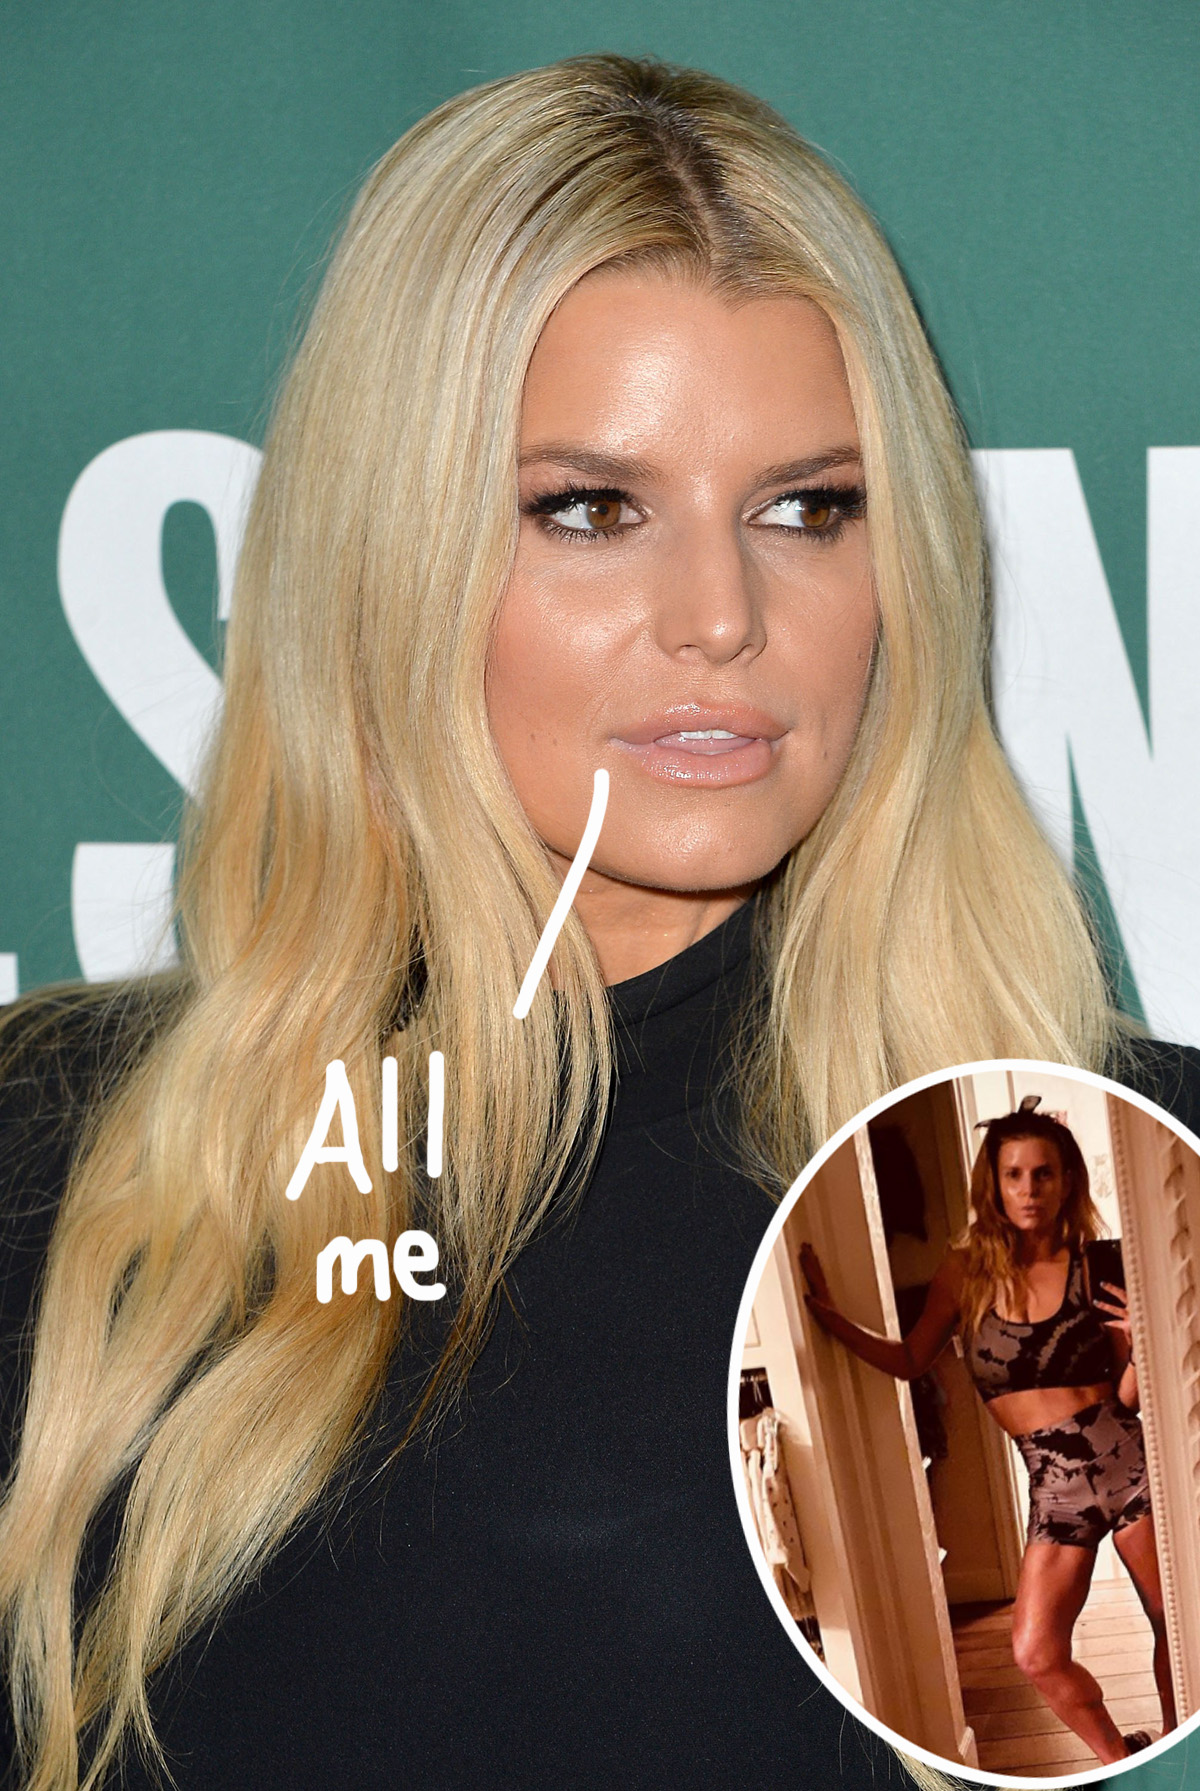 Jessica Simpson shows off yoga pose and fit frame in latest